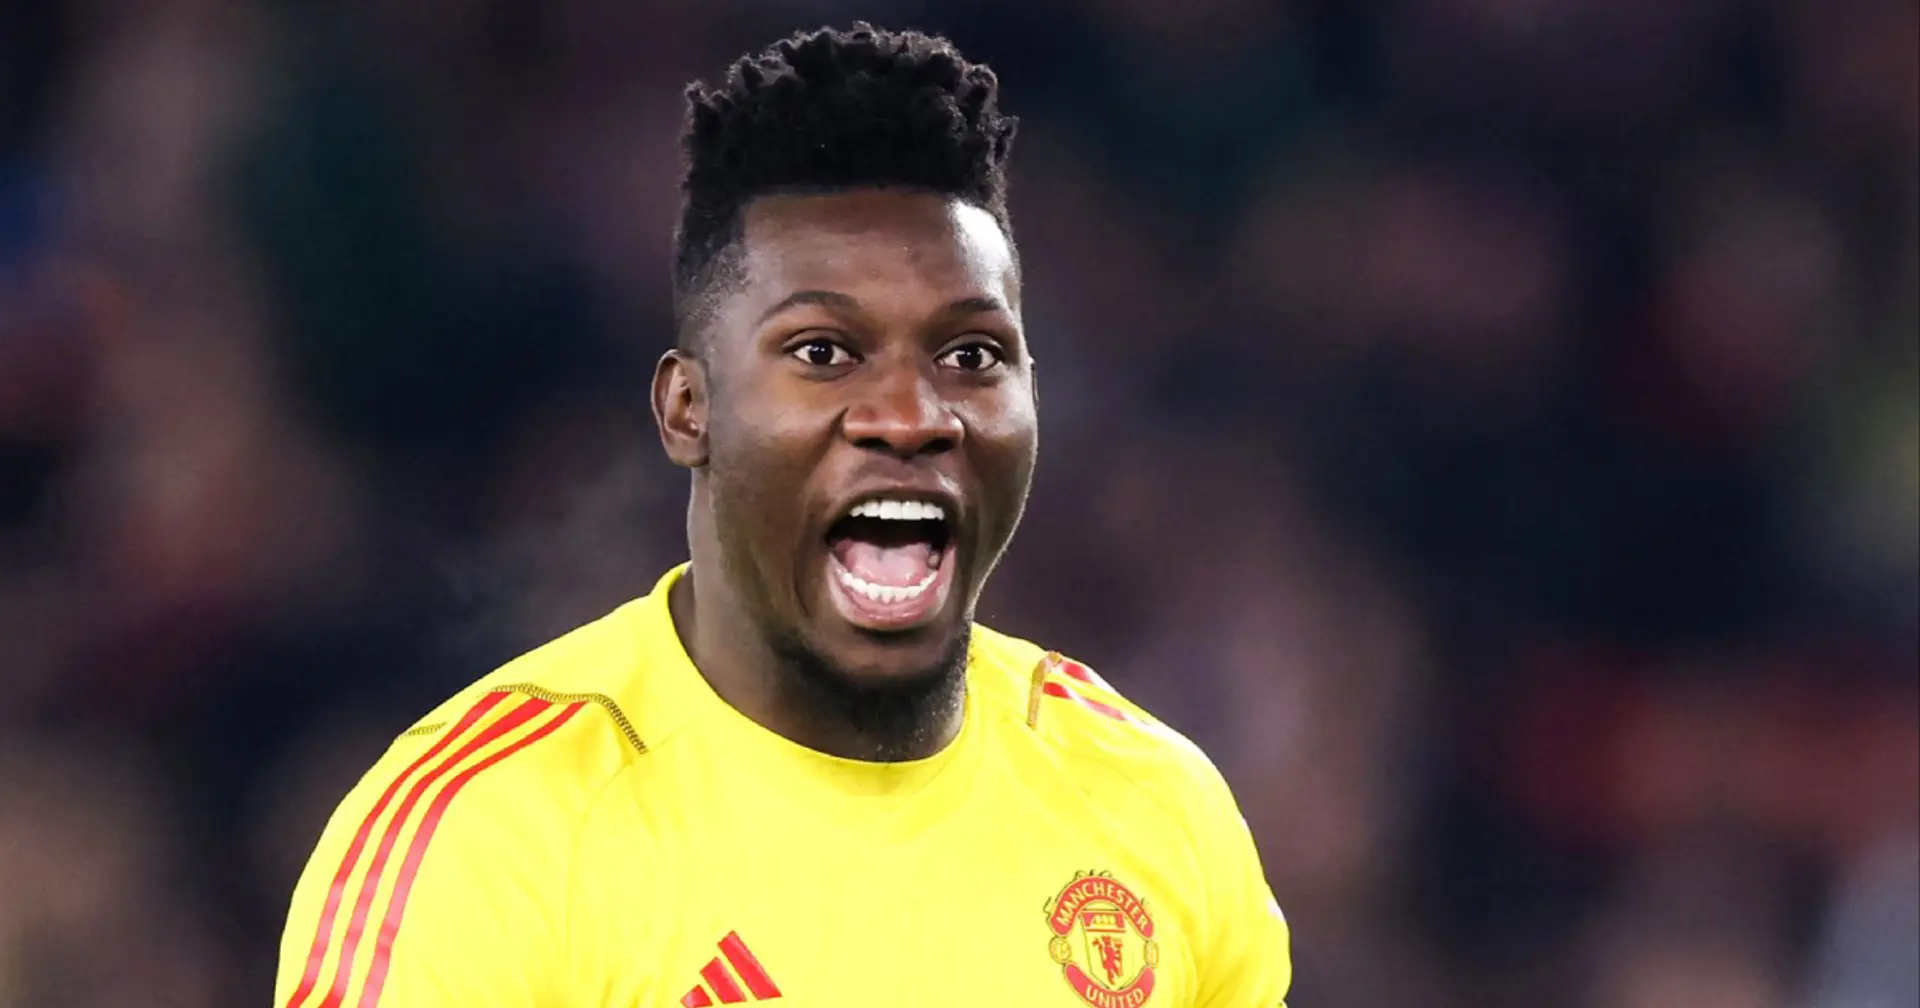 'Credit where it's due': Man United fans react to Andre Onana's renaissance